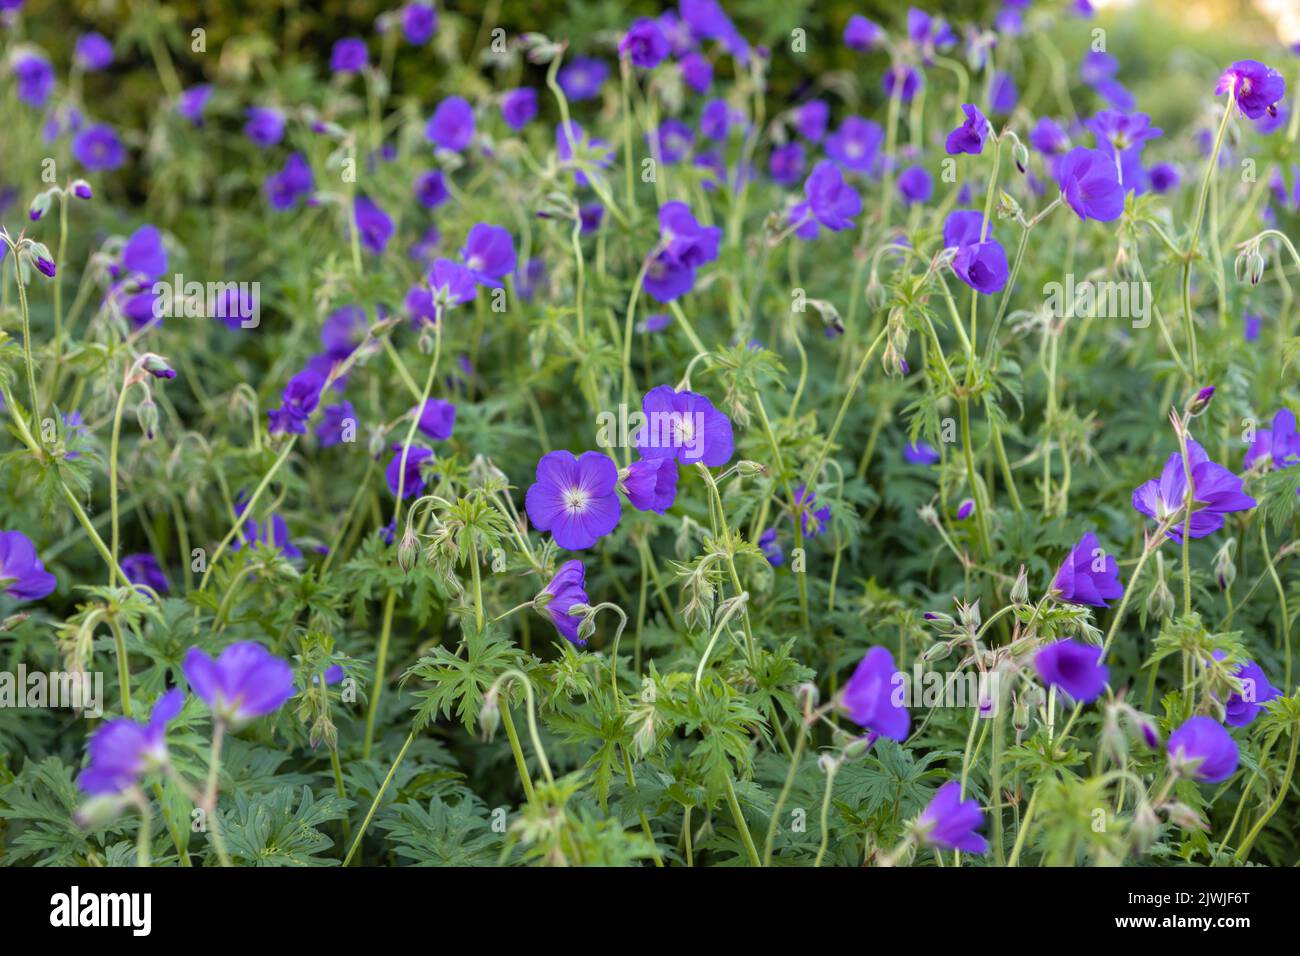 Geranium 'Orion' (cranesbill) in flower, large grouping Stock Photo